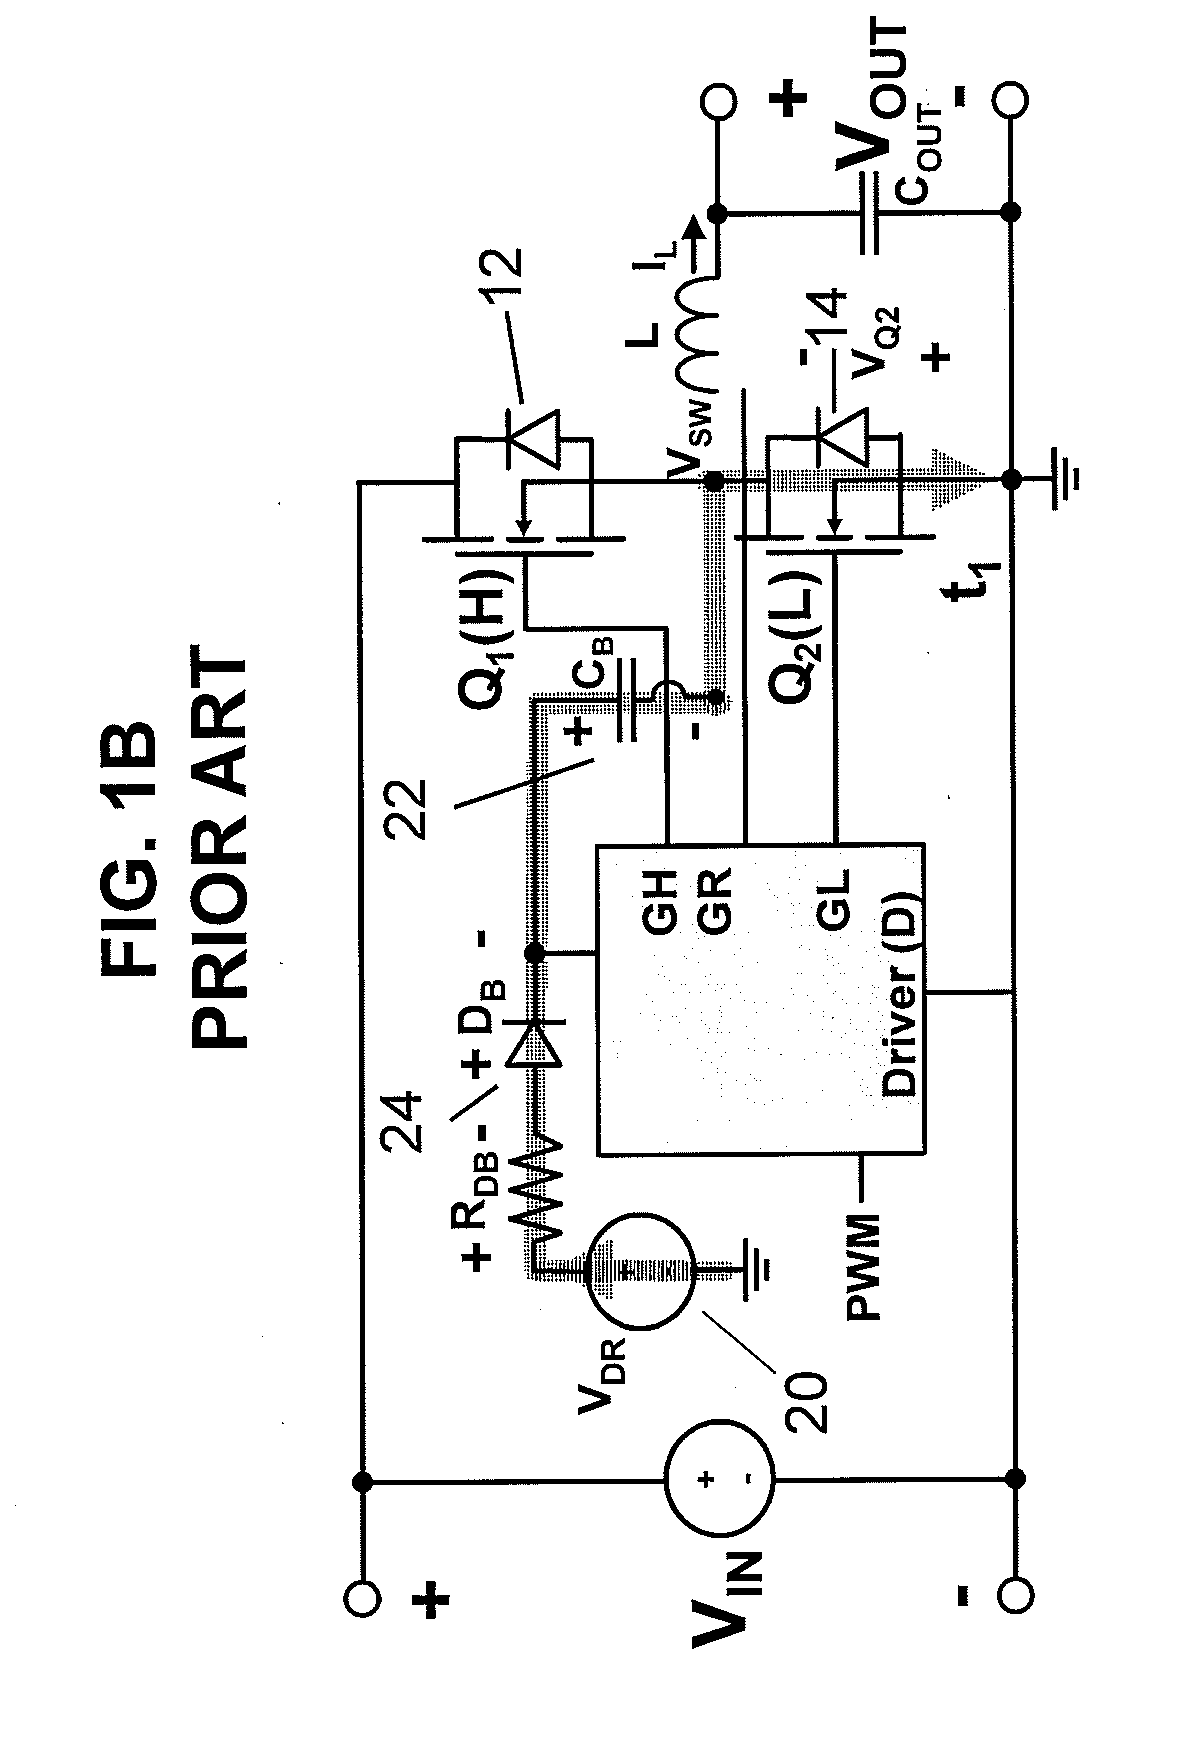 BOOTSTRAP CAPACITOR OVER-VOLTAGE MANAGEMENT CIRCUIT FOR GaN TRANSISTOR BASED POWER CONVERTERS